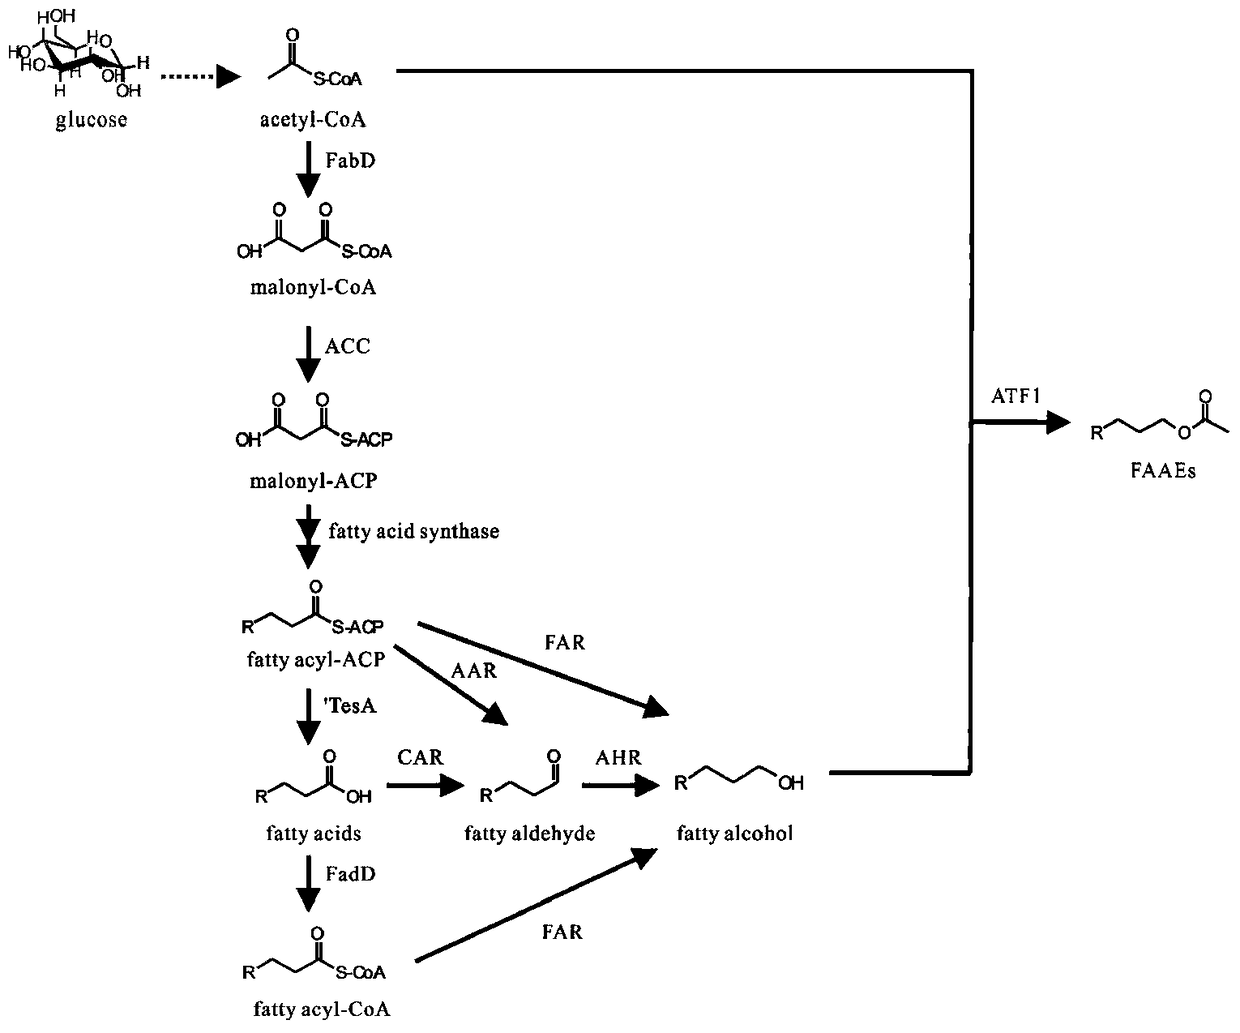 A method for synthesizing fatty alcohol acetate in microorganisms